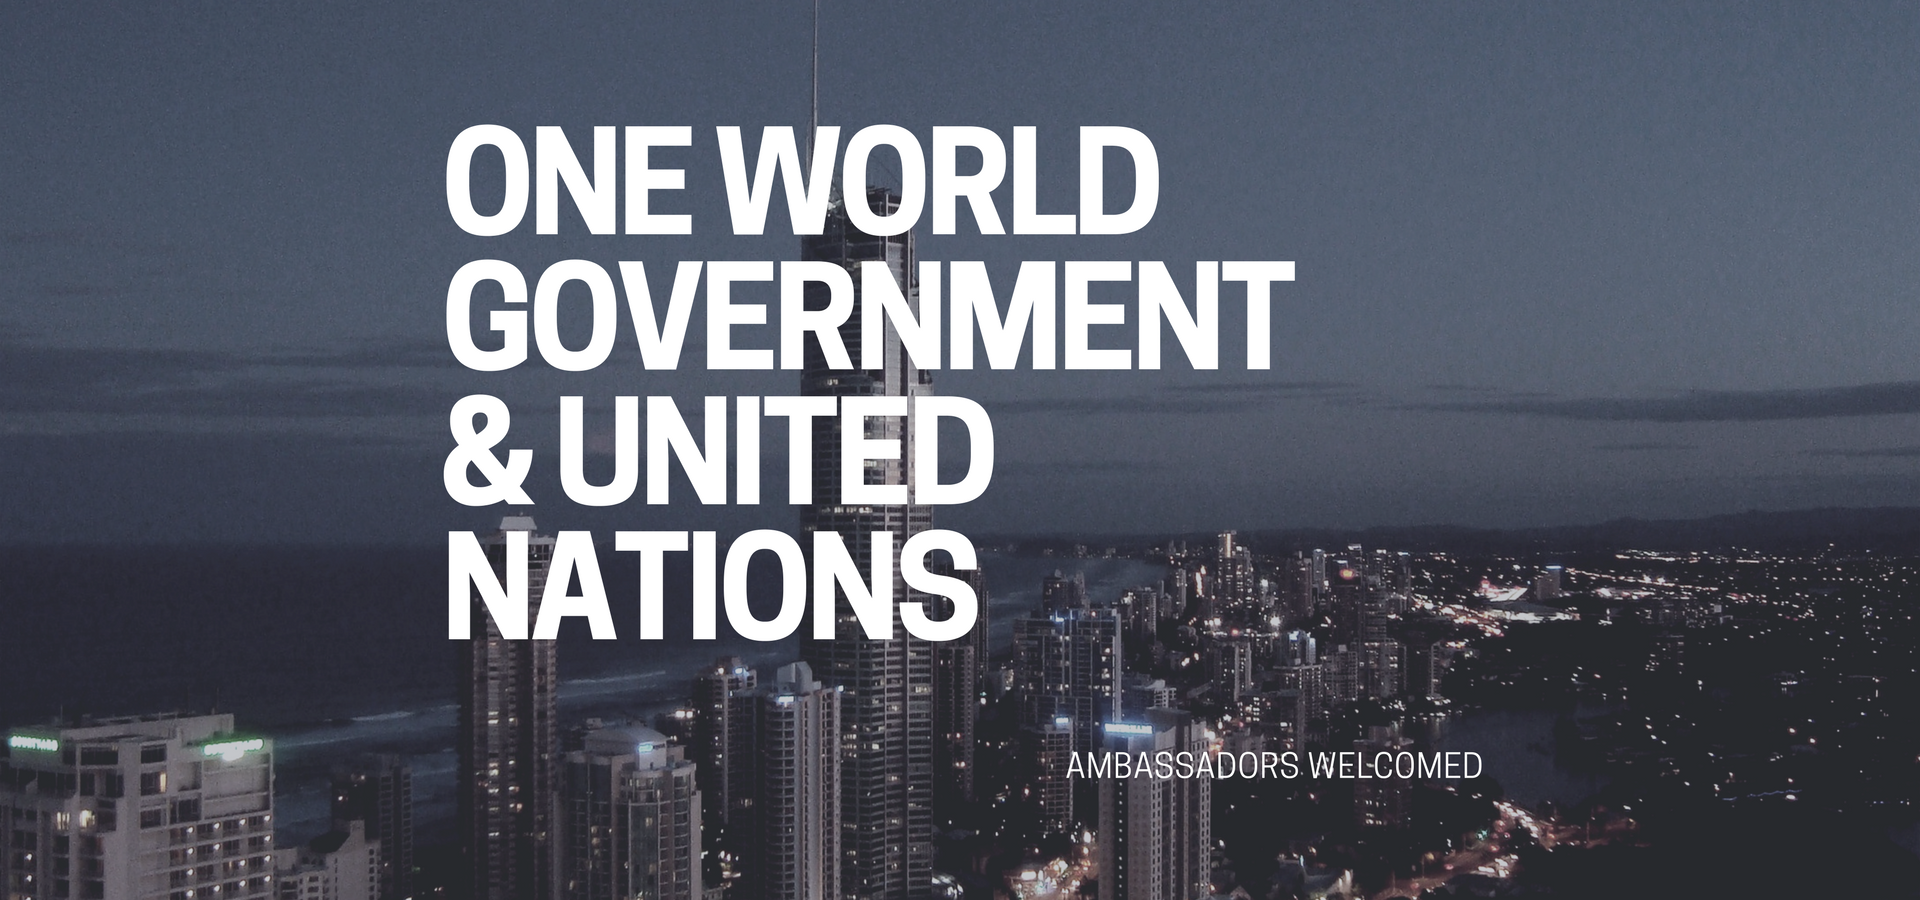 One World Government & United Nations